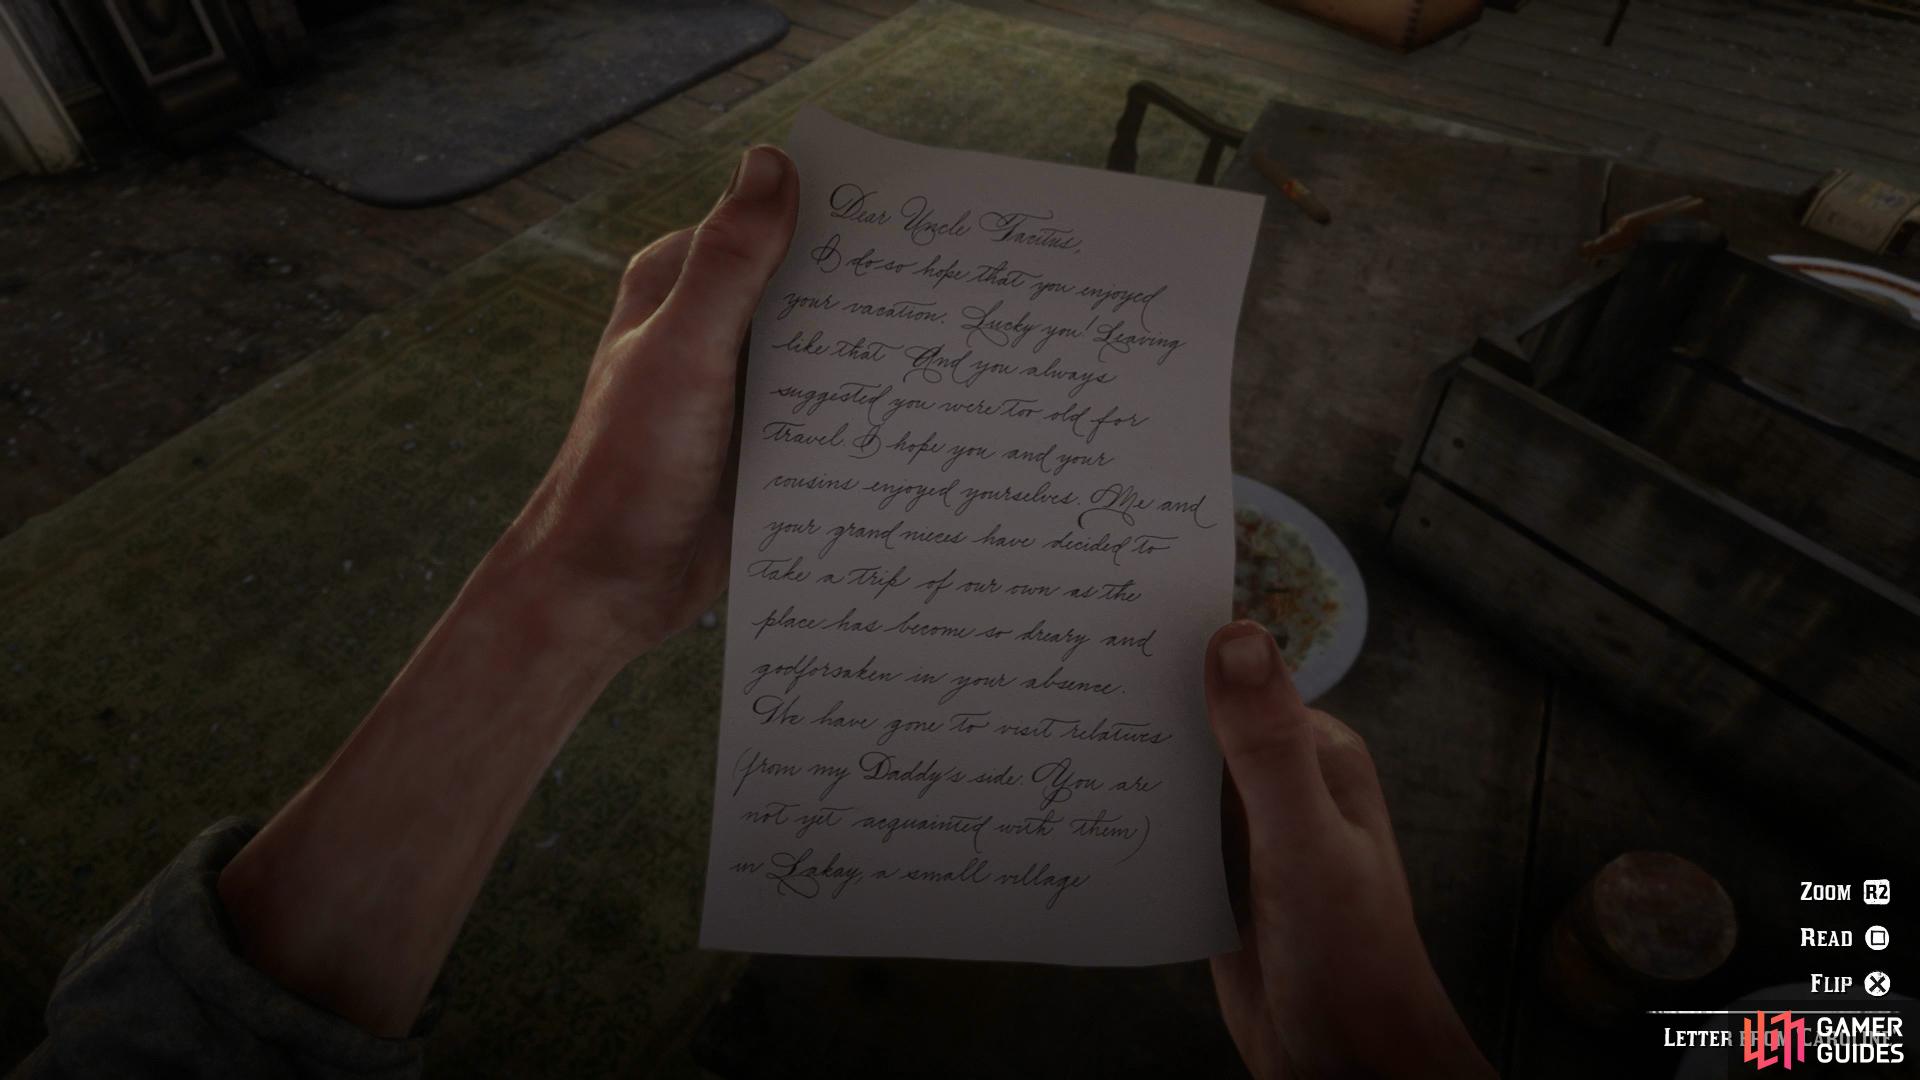 Don’t listen to the entirety of the letter to save yourself some time.